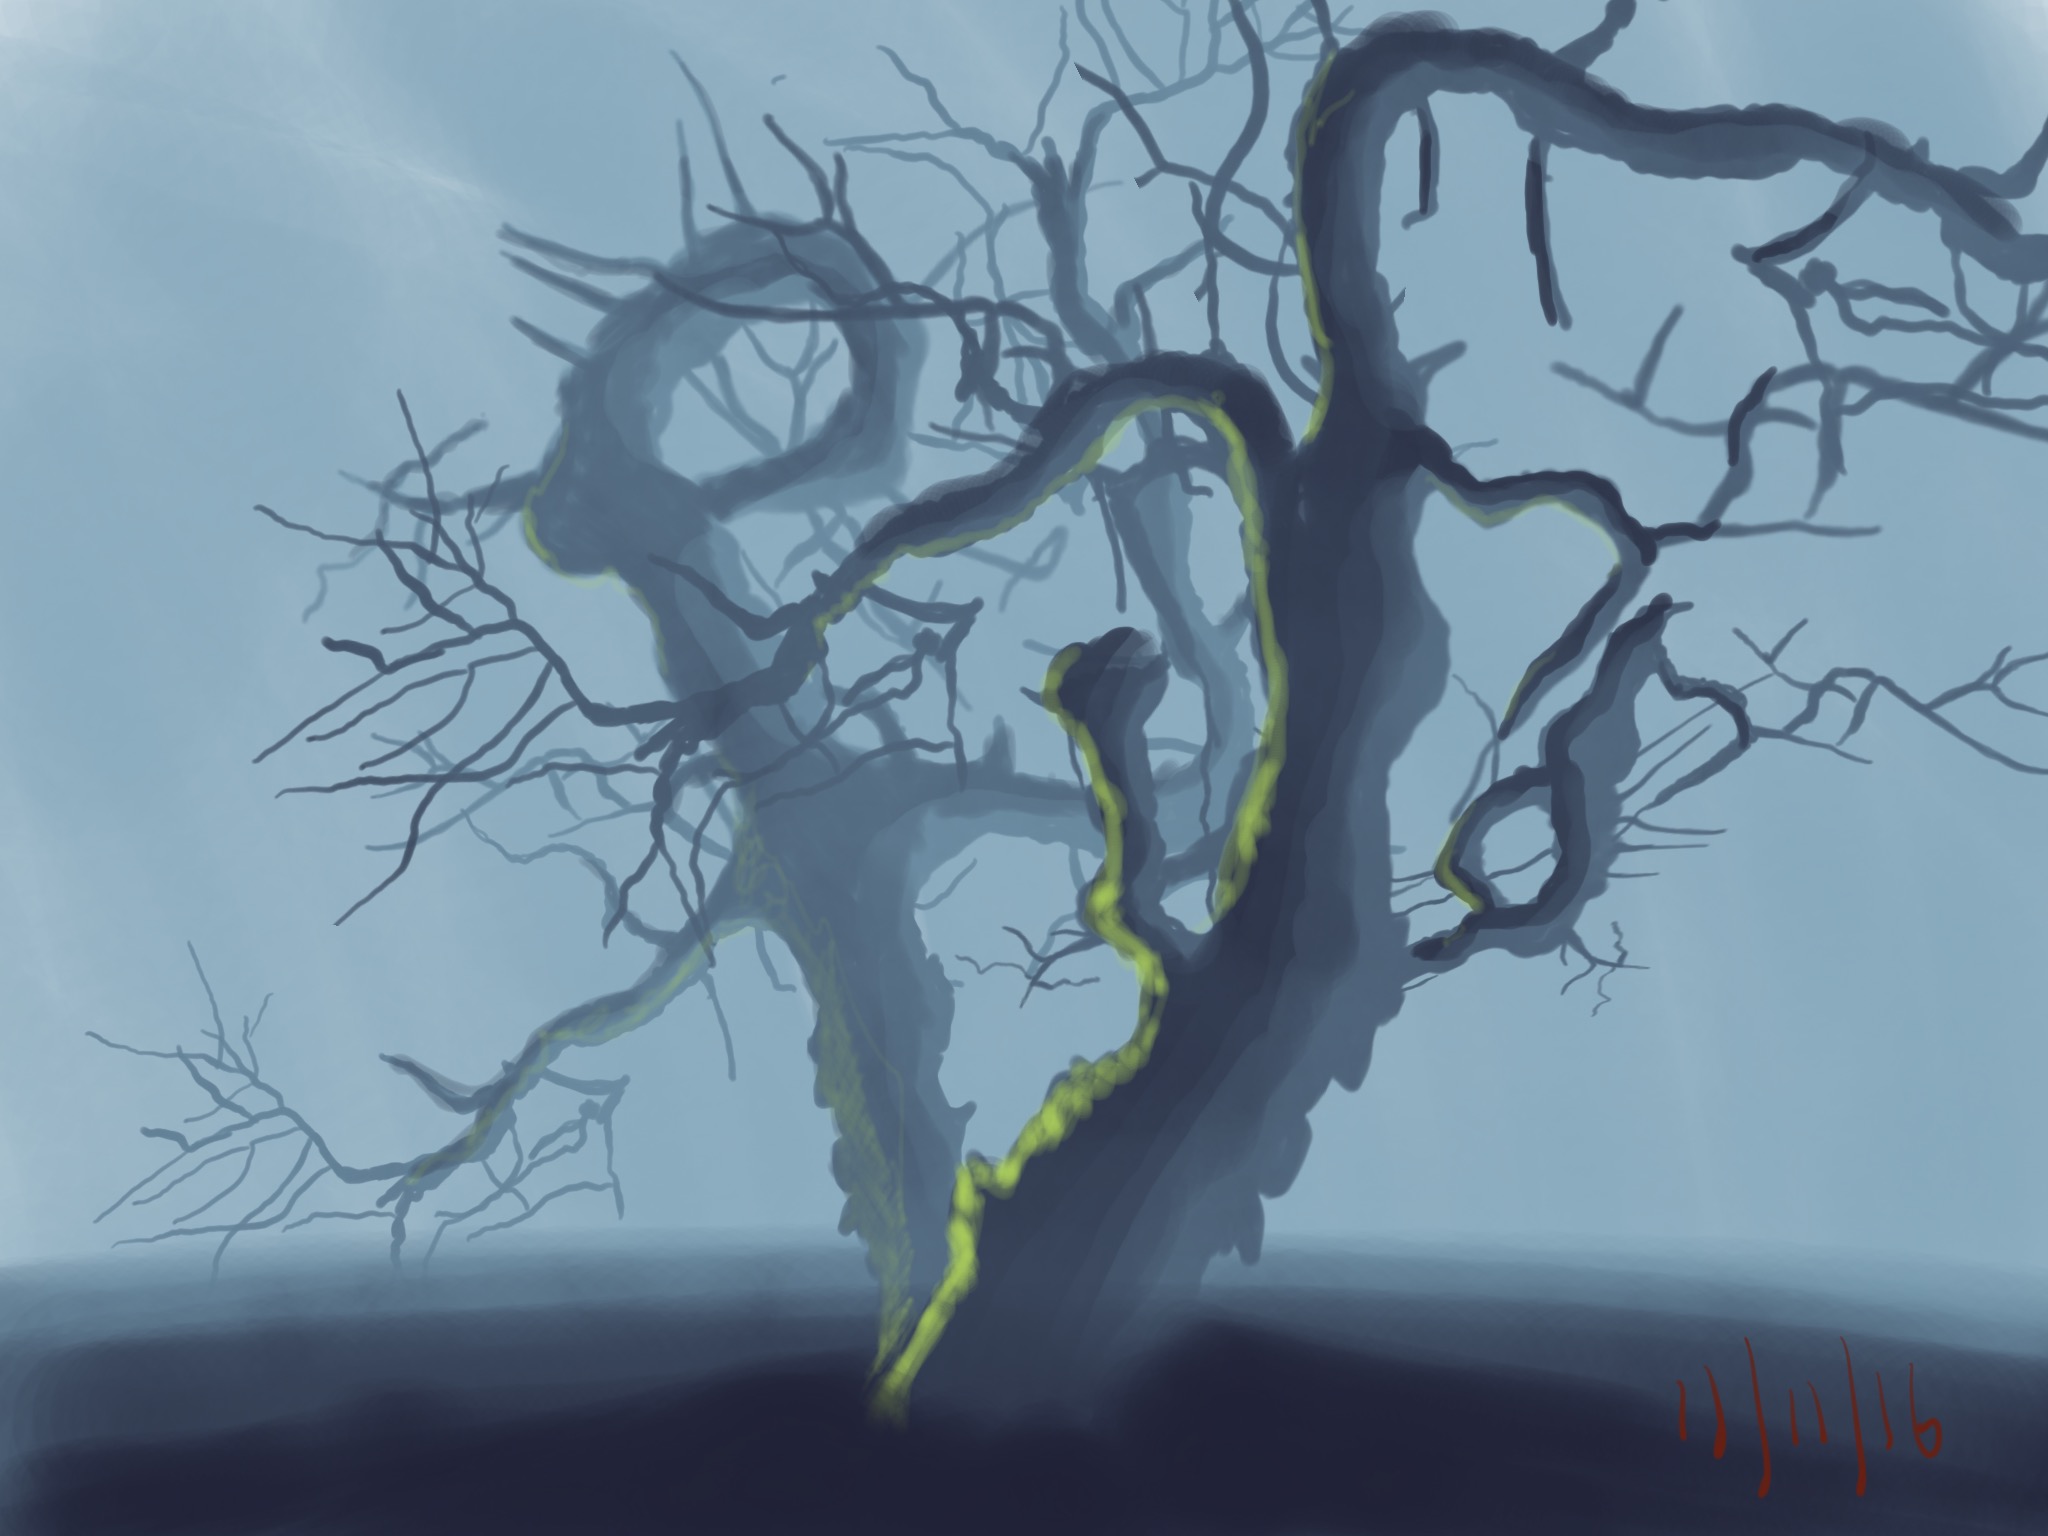 #gdpipeline daily challenge 11-11-16 "angry tree"